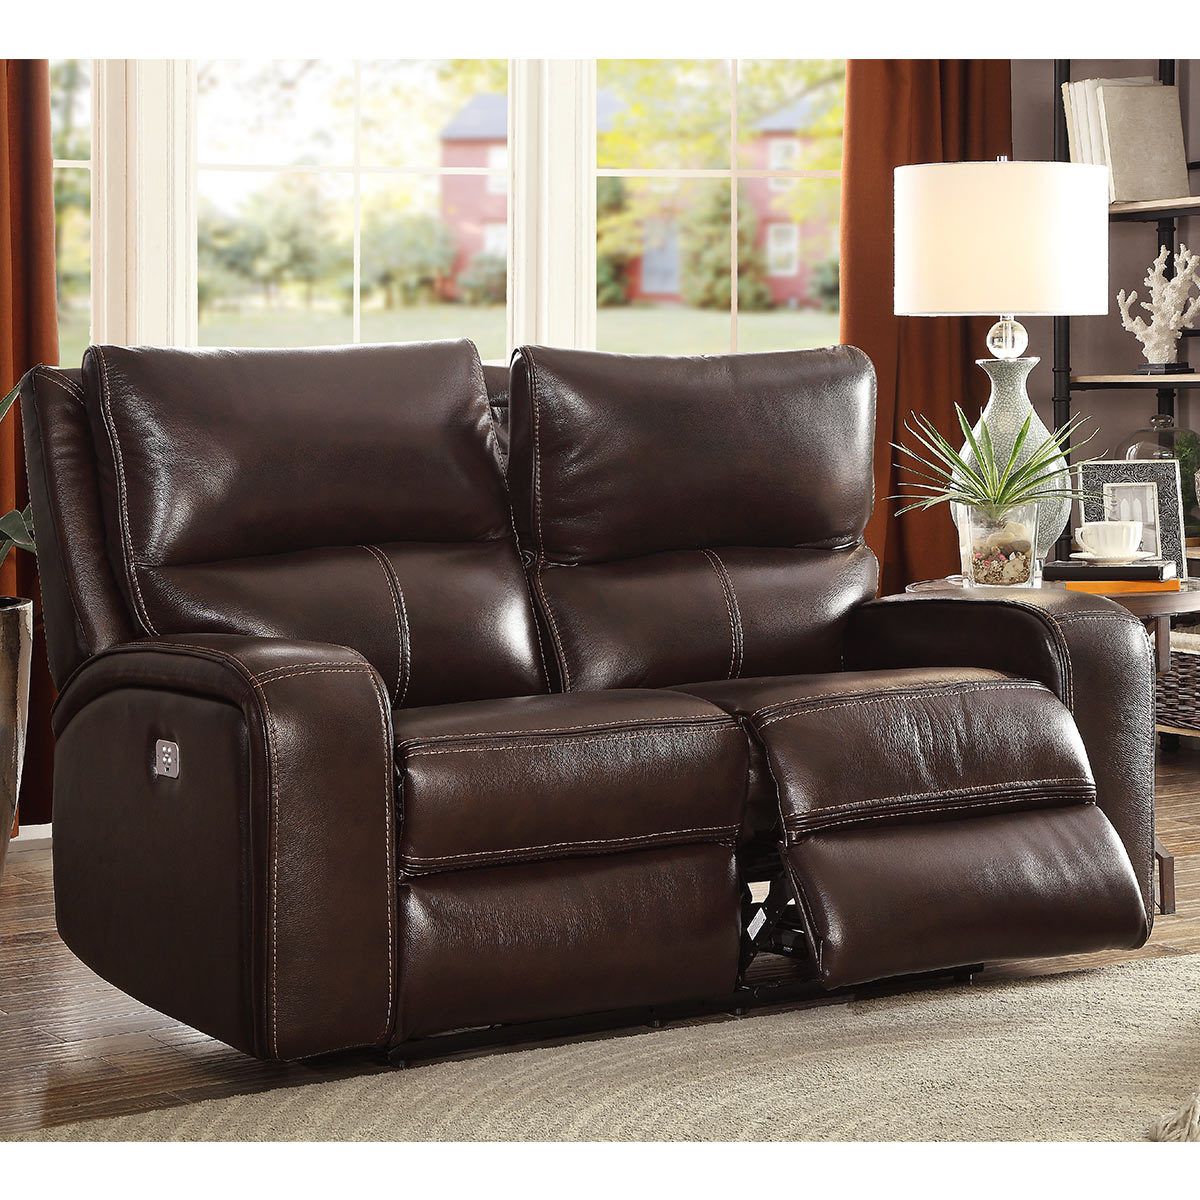 2 Seat Leather Reclining Sofa – Sofa Design Ideas Within Contempo Power Reclining Sofas (View 14 of 15)